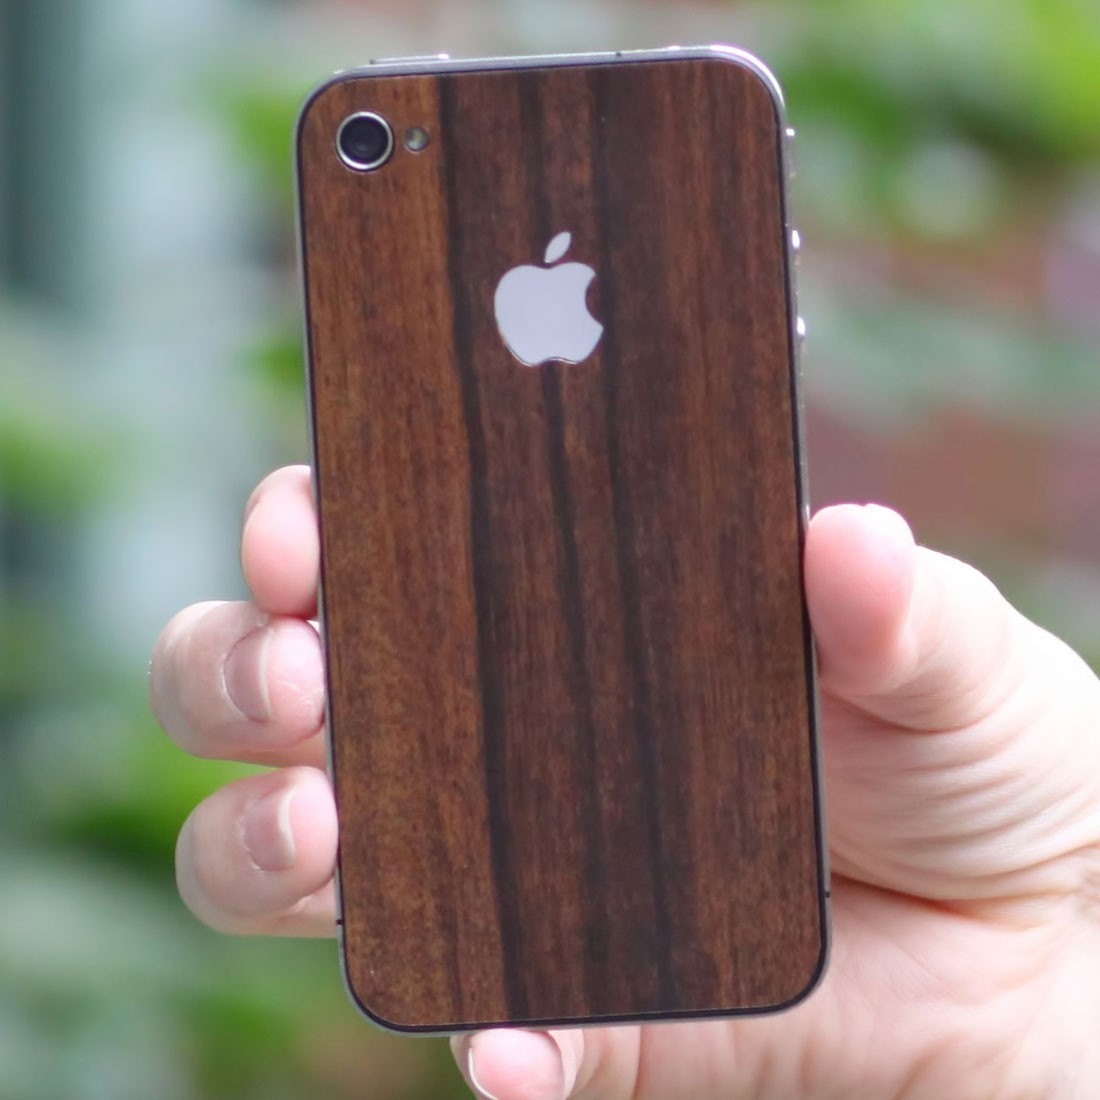 Teksure Parudao Wood iPhone 5 Skin by The Lucky Labs